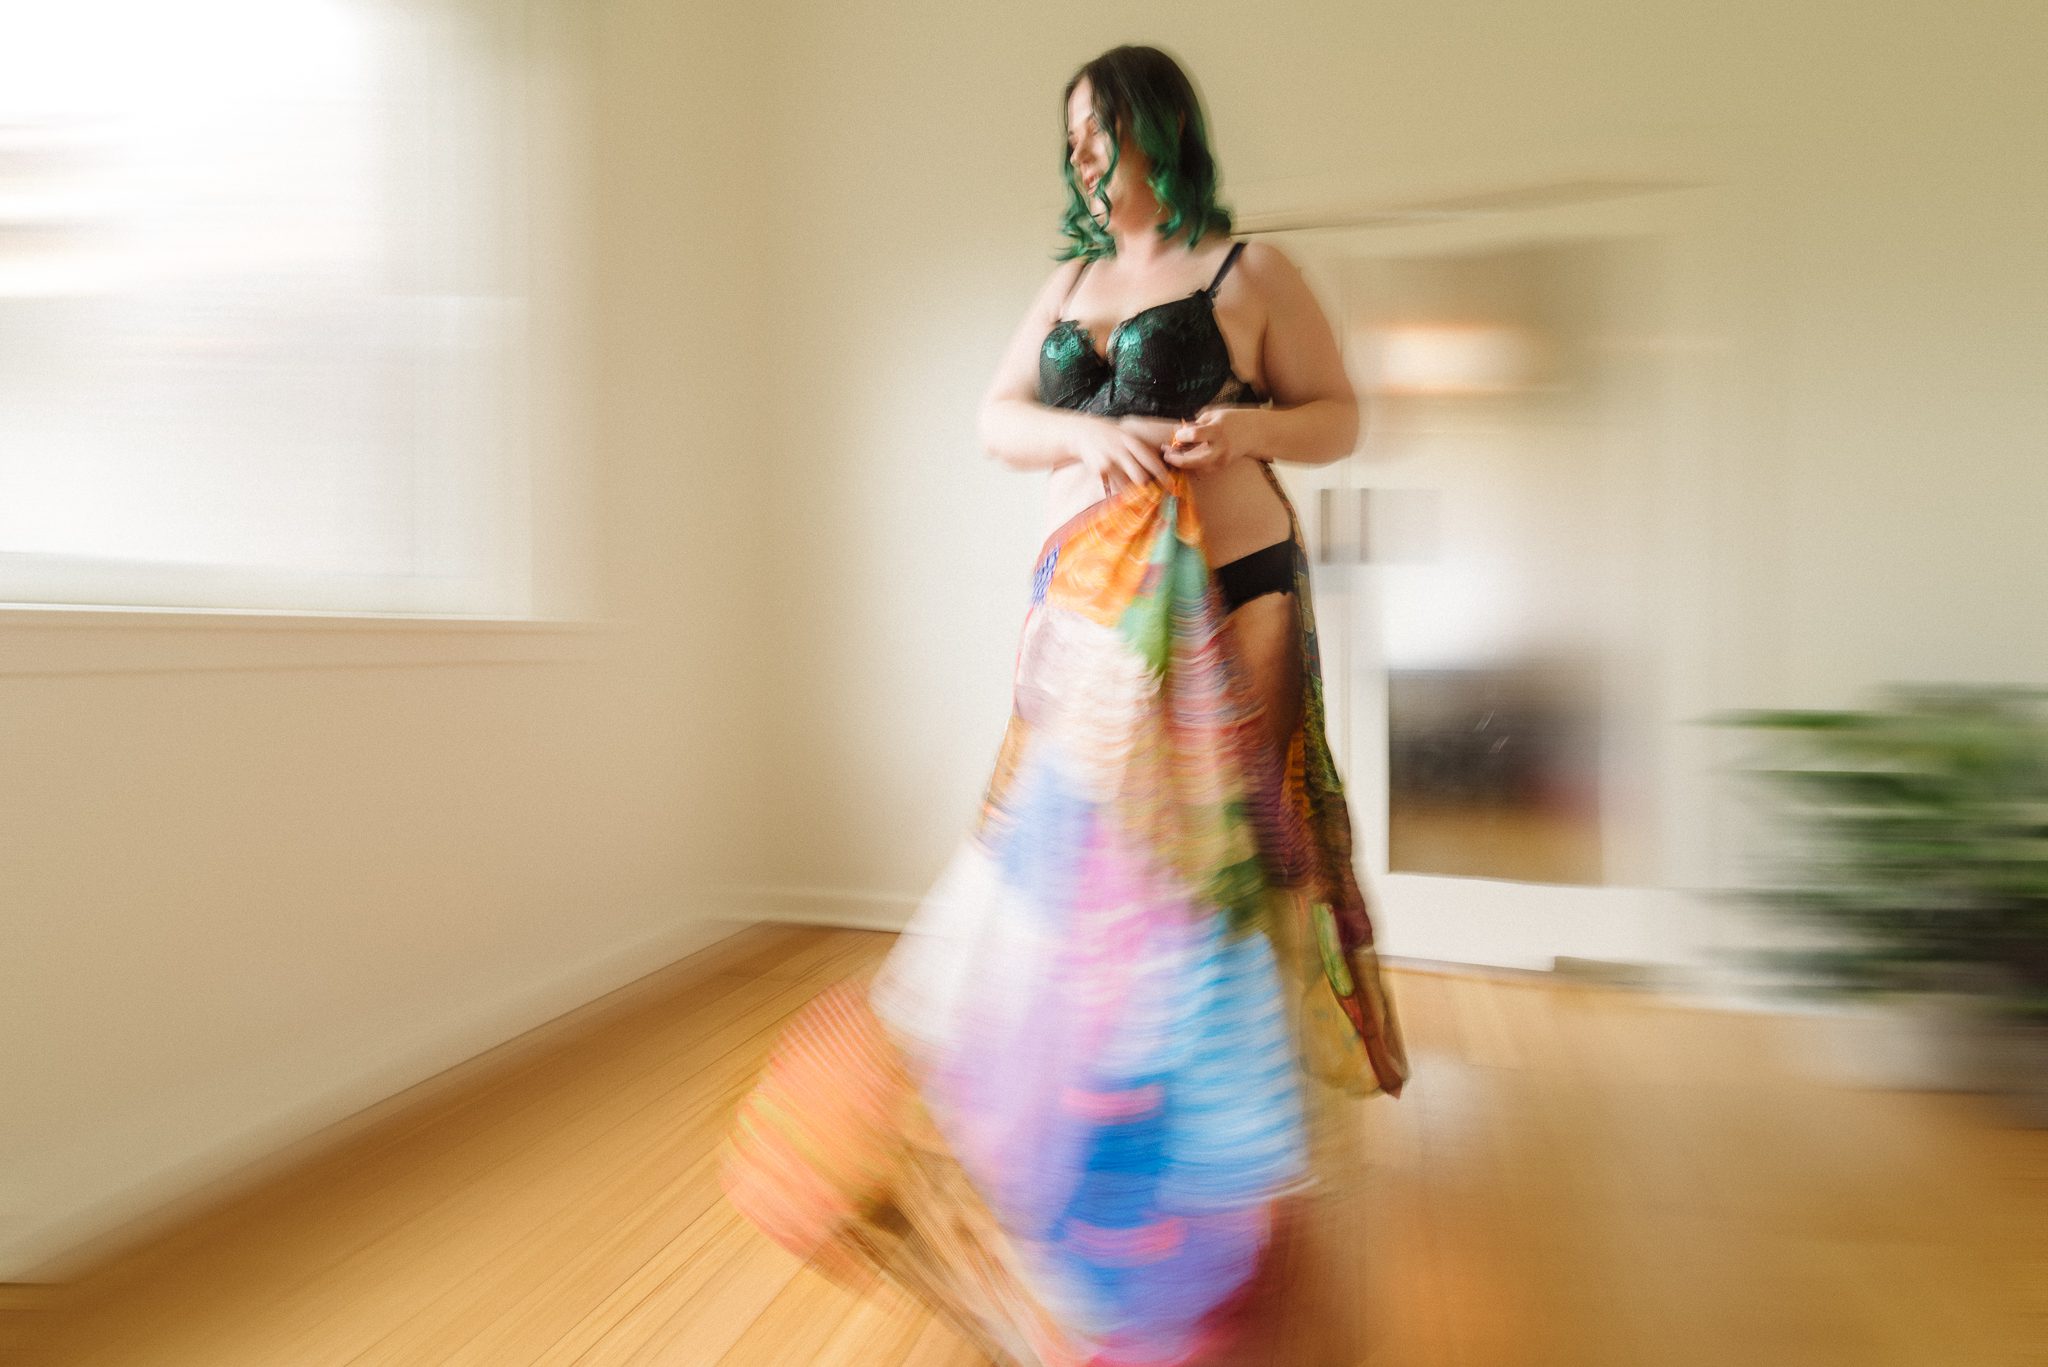 Motion blur photo of a woman and bright colourful skirt